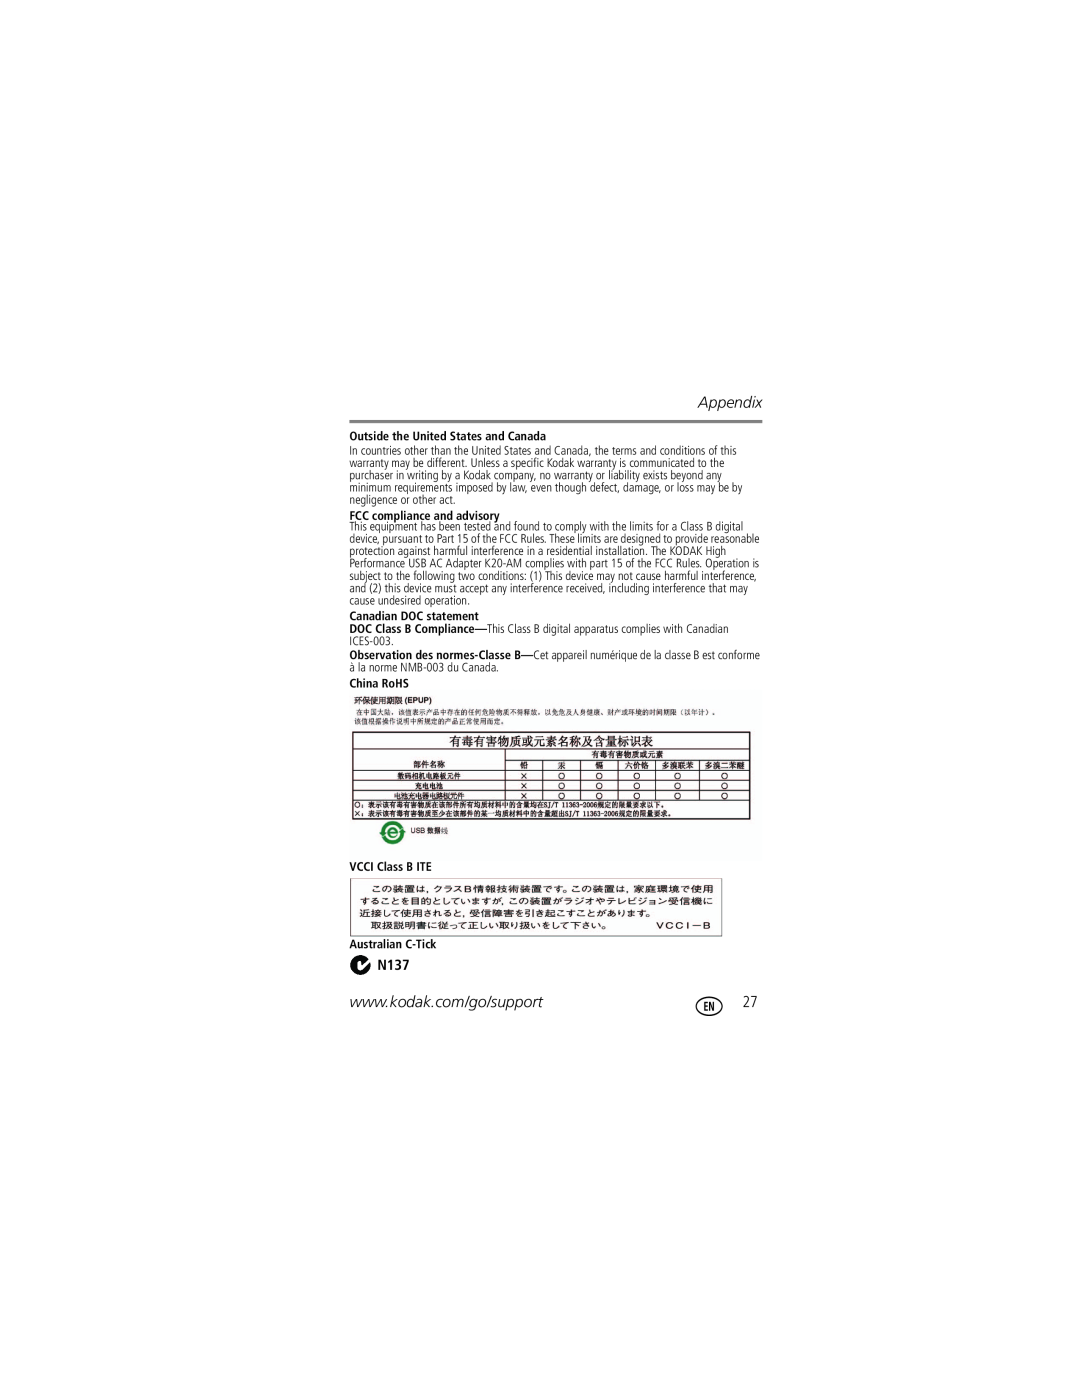 Kodak Z990 manual Appendix, N137, Outside the United States and Canada, FCC compliance and advisory, Canadian DOC statement 